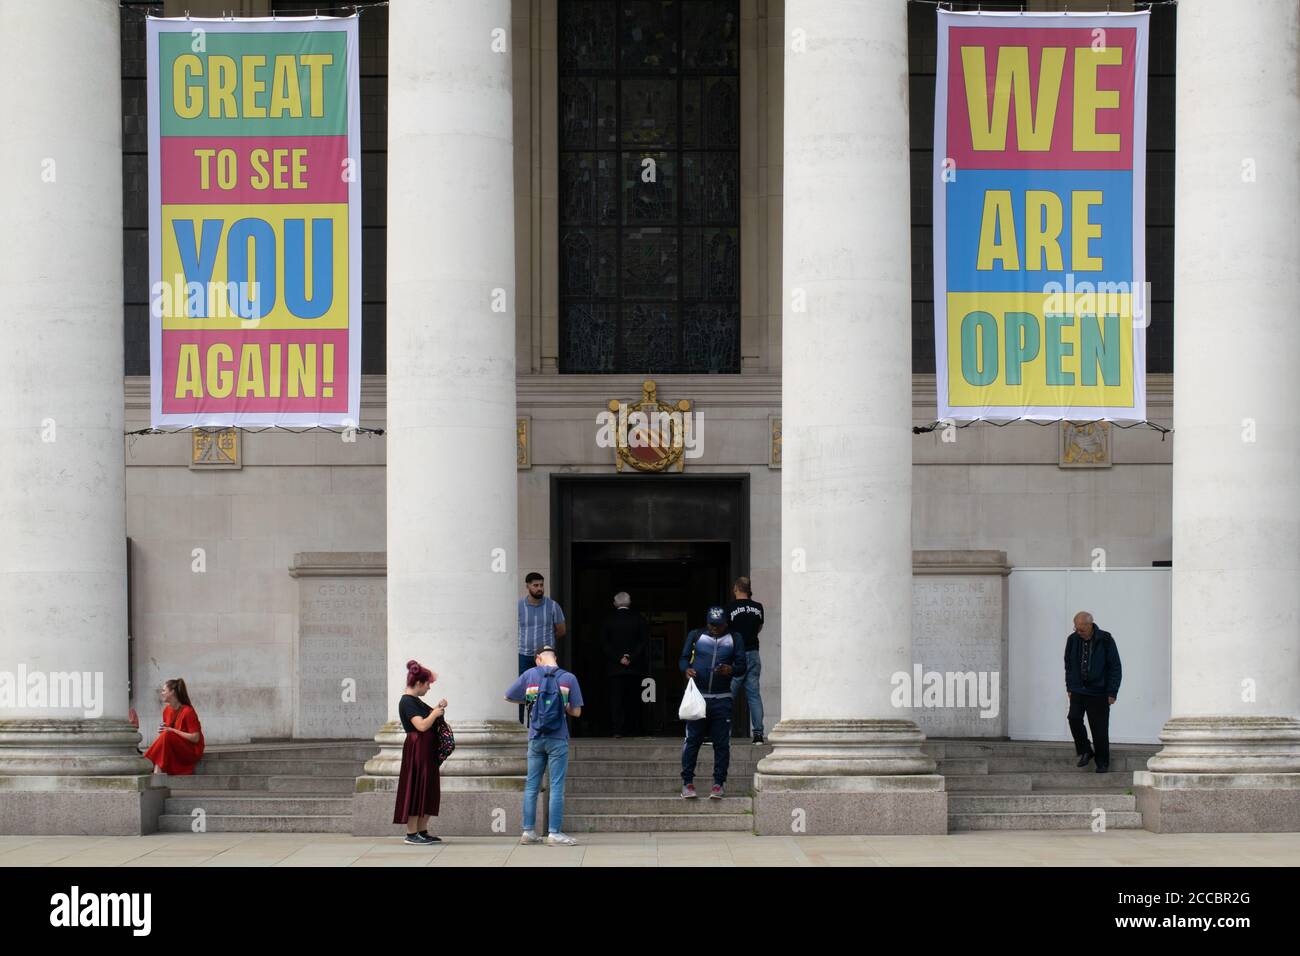 Manchester Central Library UK with signs advertising that they are open again after the coronavirus lockdown. Stock Photo